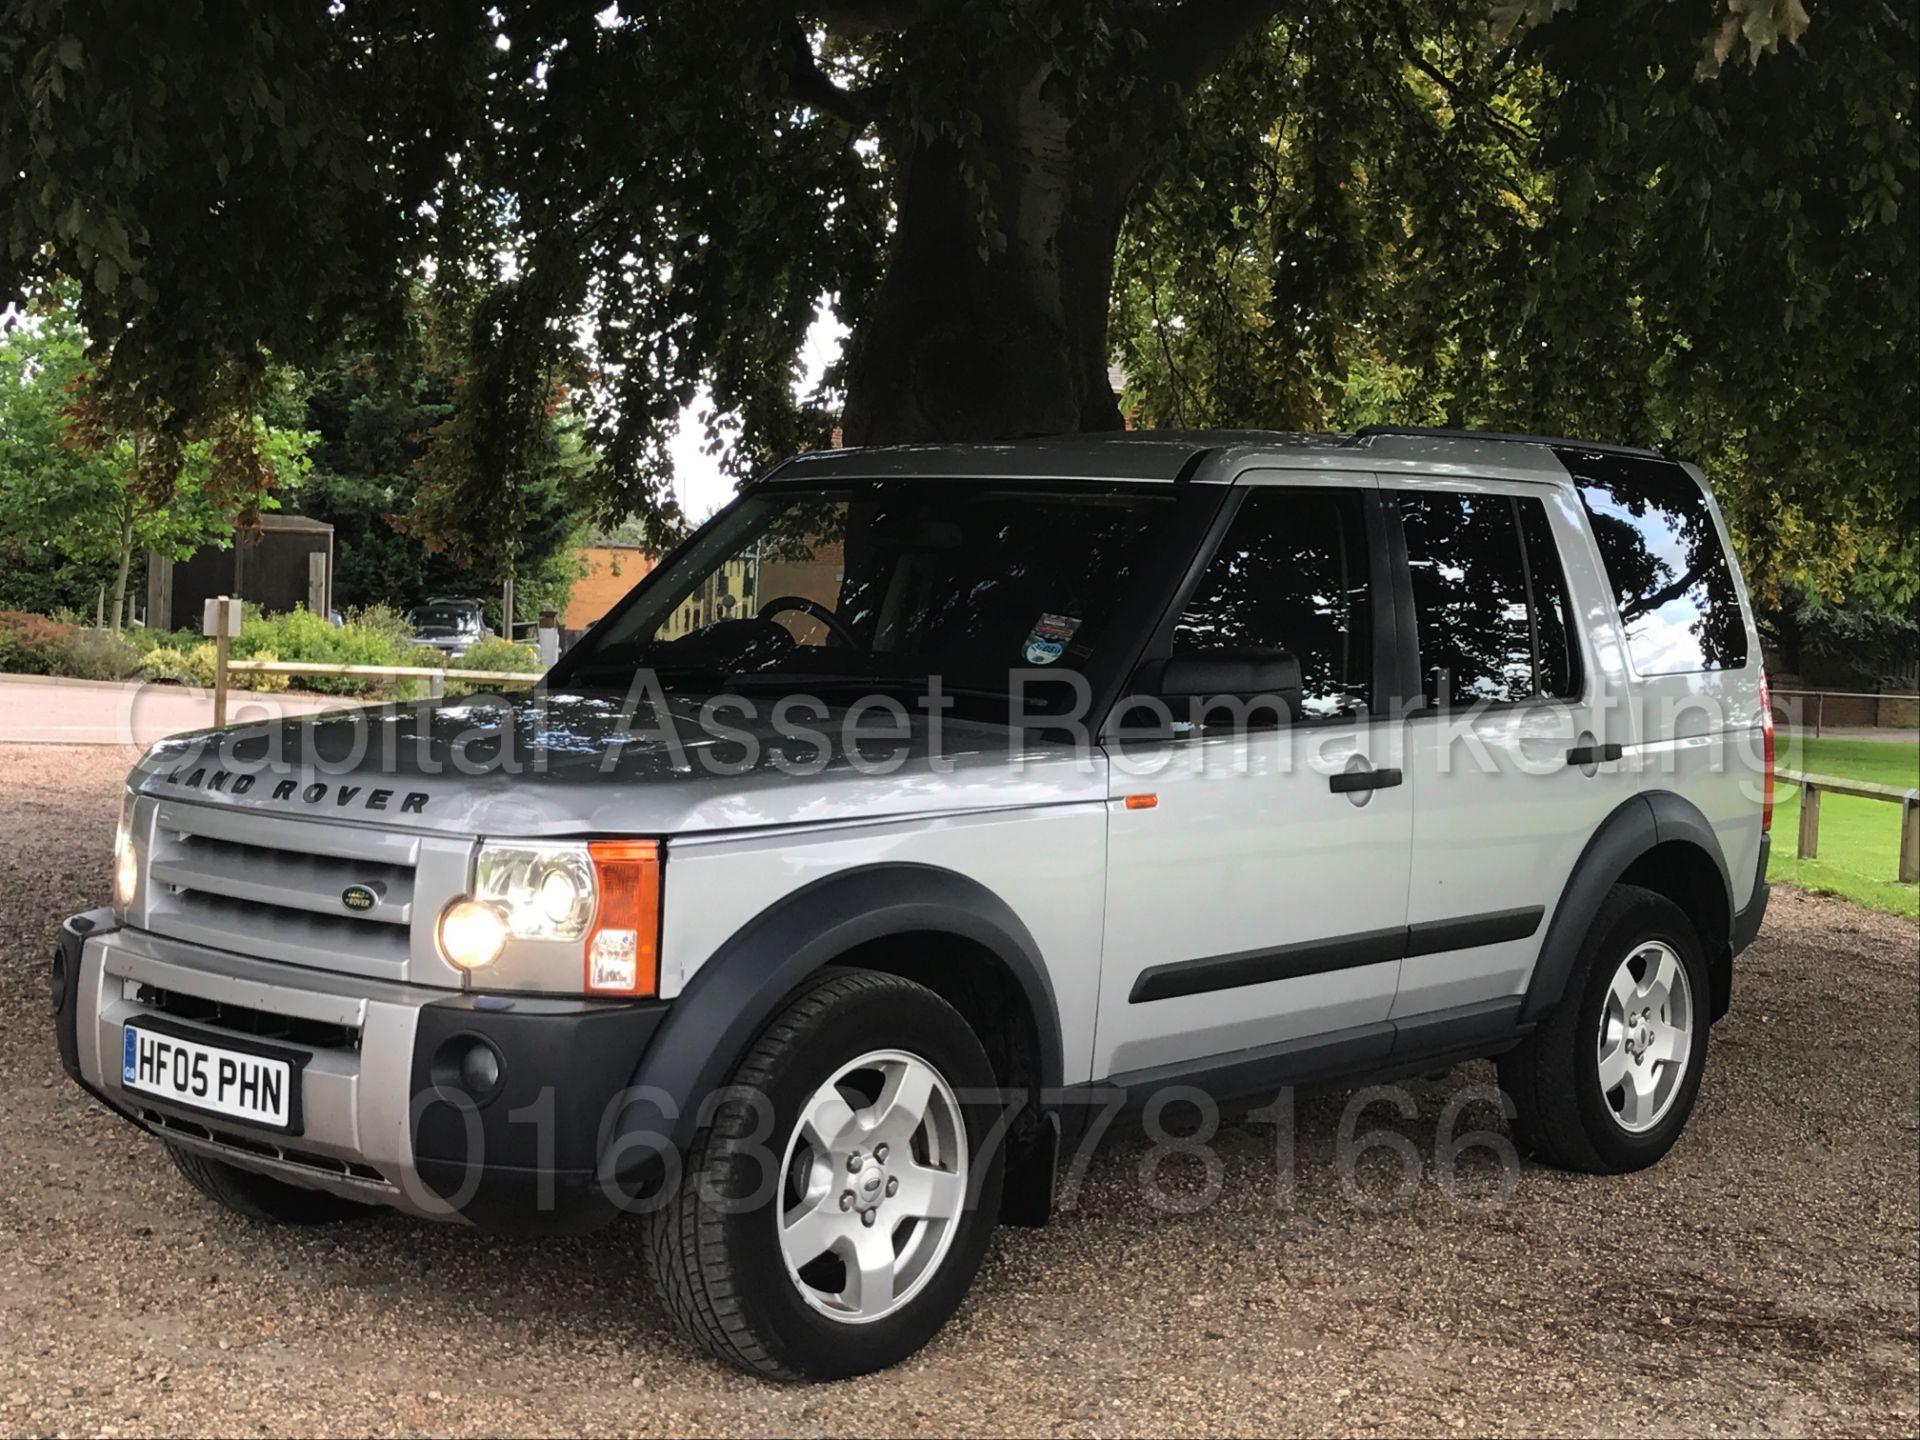 (On Sale) LAND ROVER DISCOVERY 3 (2005 - FACELIFT MODEL) 'TDV6 - AUTO - 7 SEATER - SAT NAV' (NO VAT) - Image 5 of 36